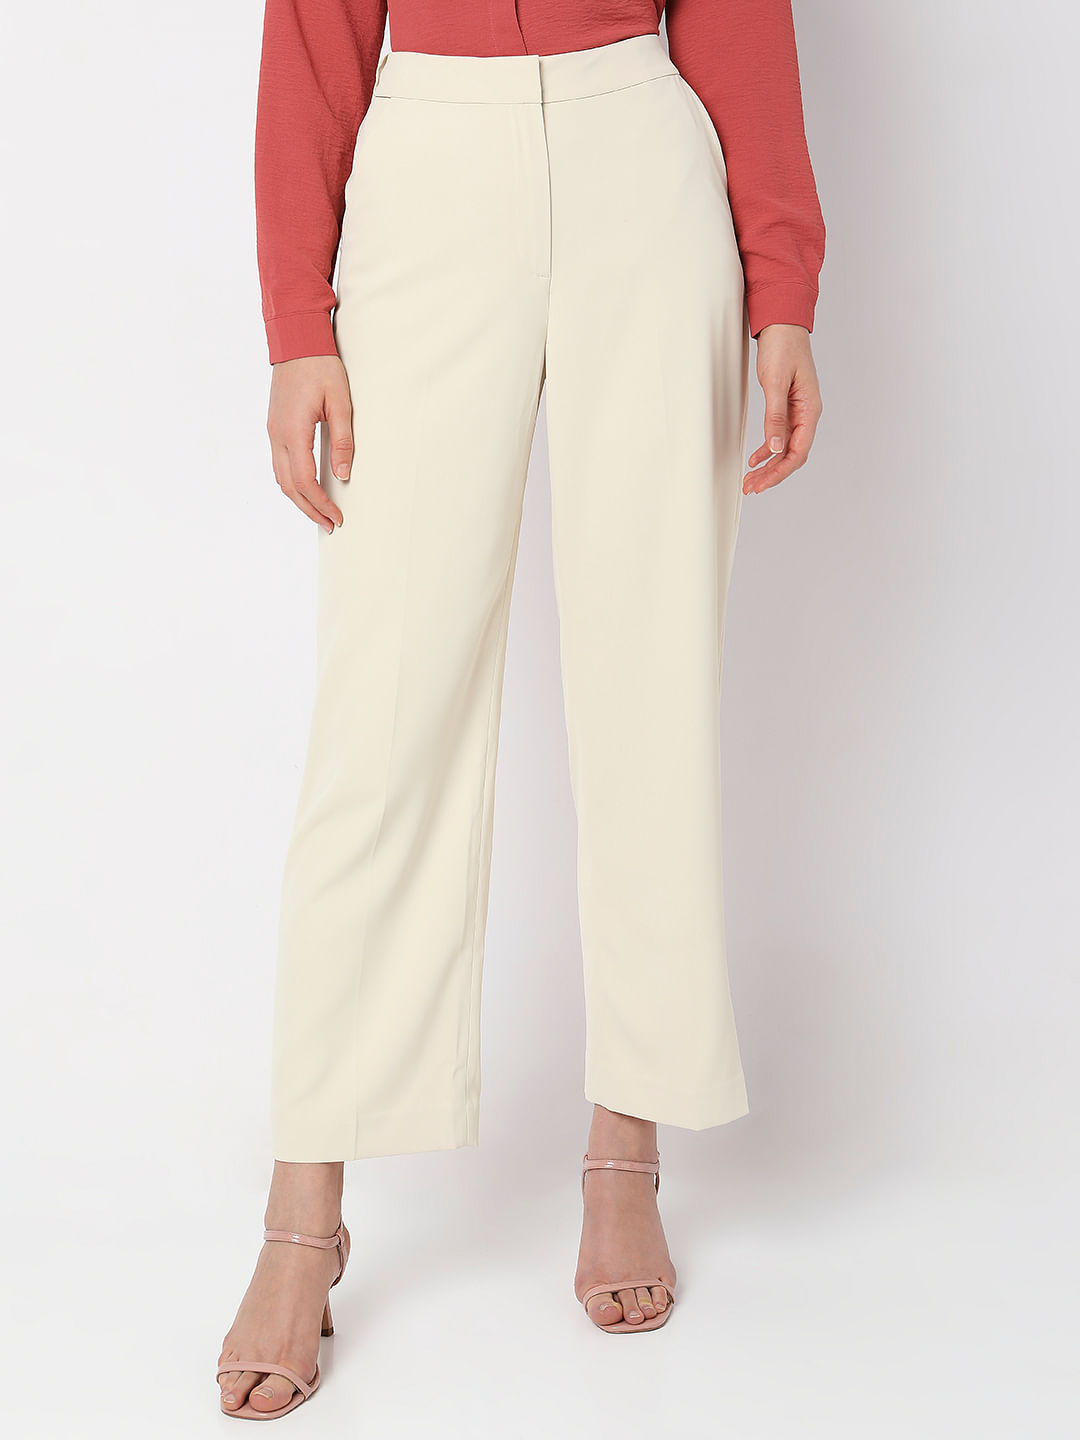 KASSUALLY Trousers and Pants  Buy KASSUALLY White High Waist Flared  Parallel Trouser Online  Nykaa Fashion